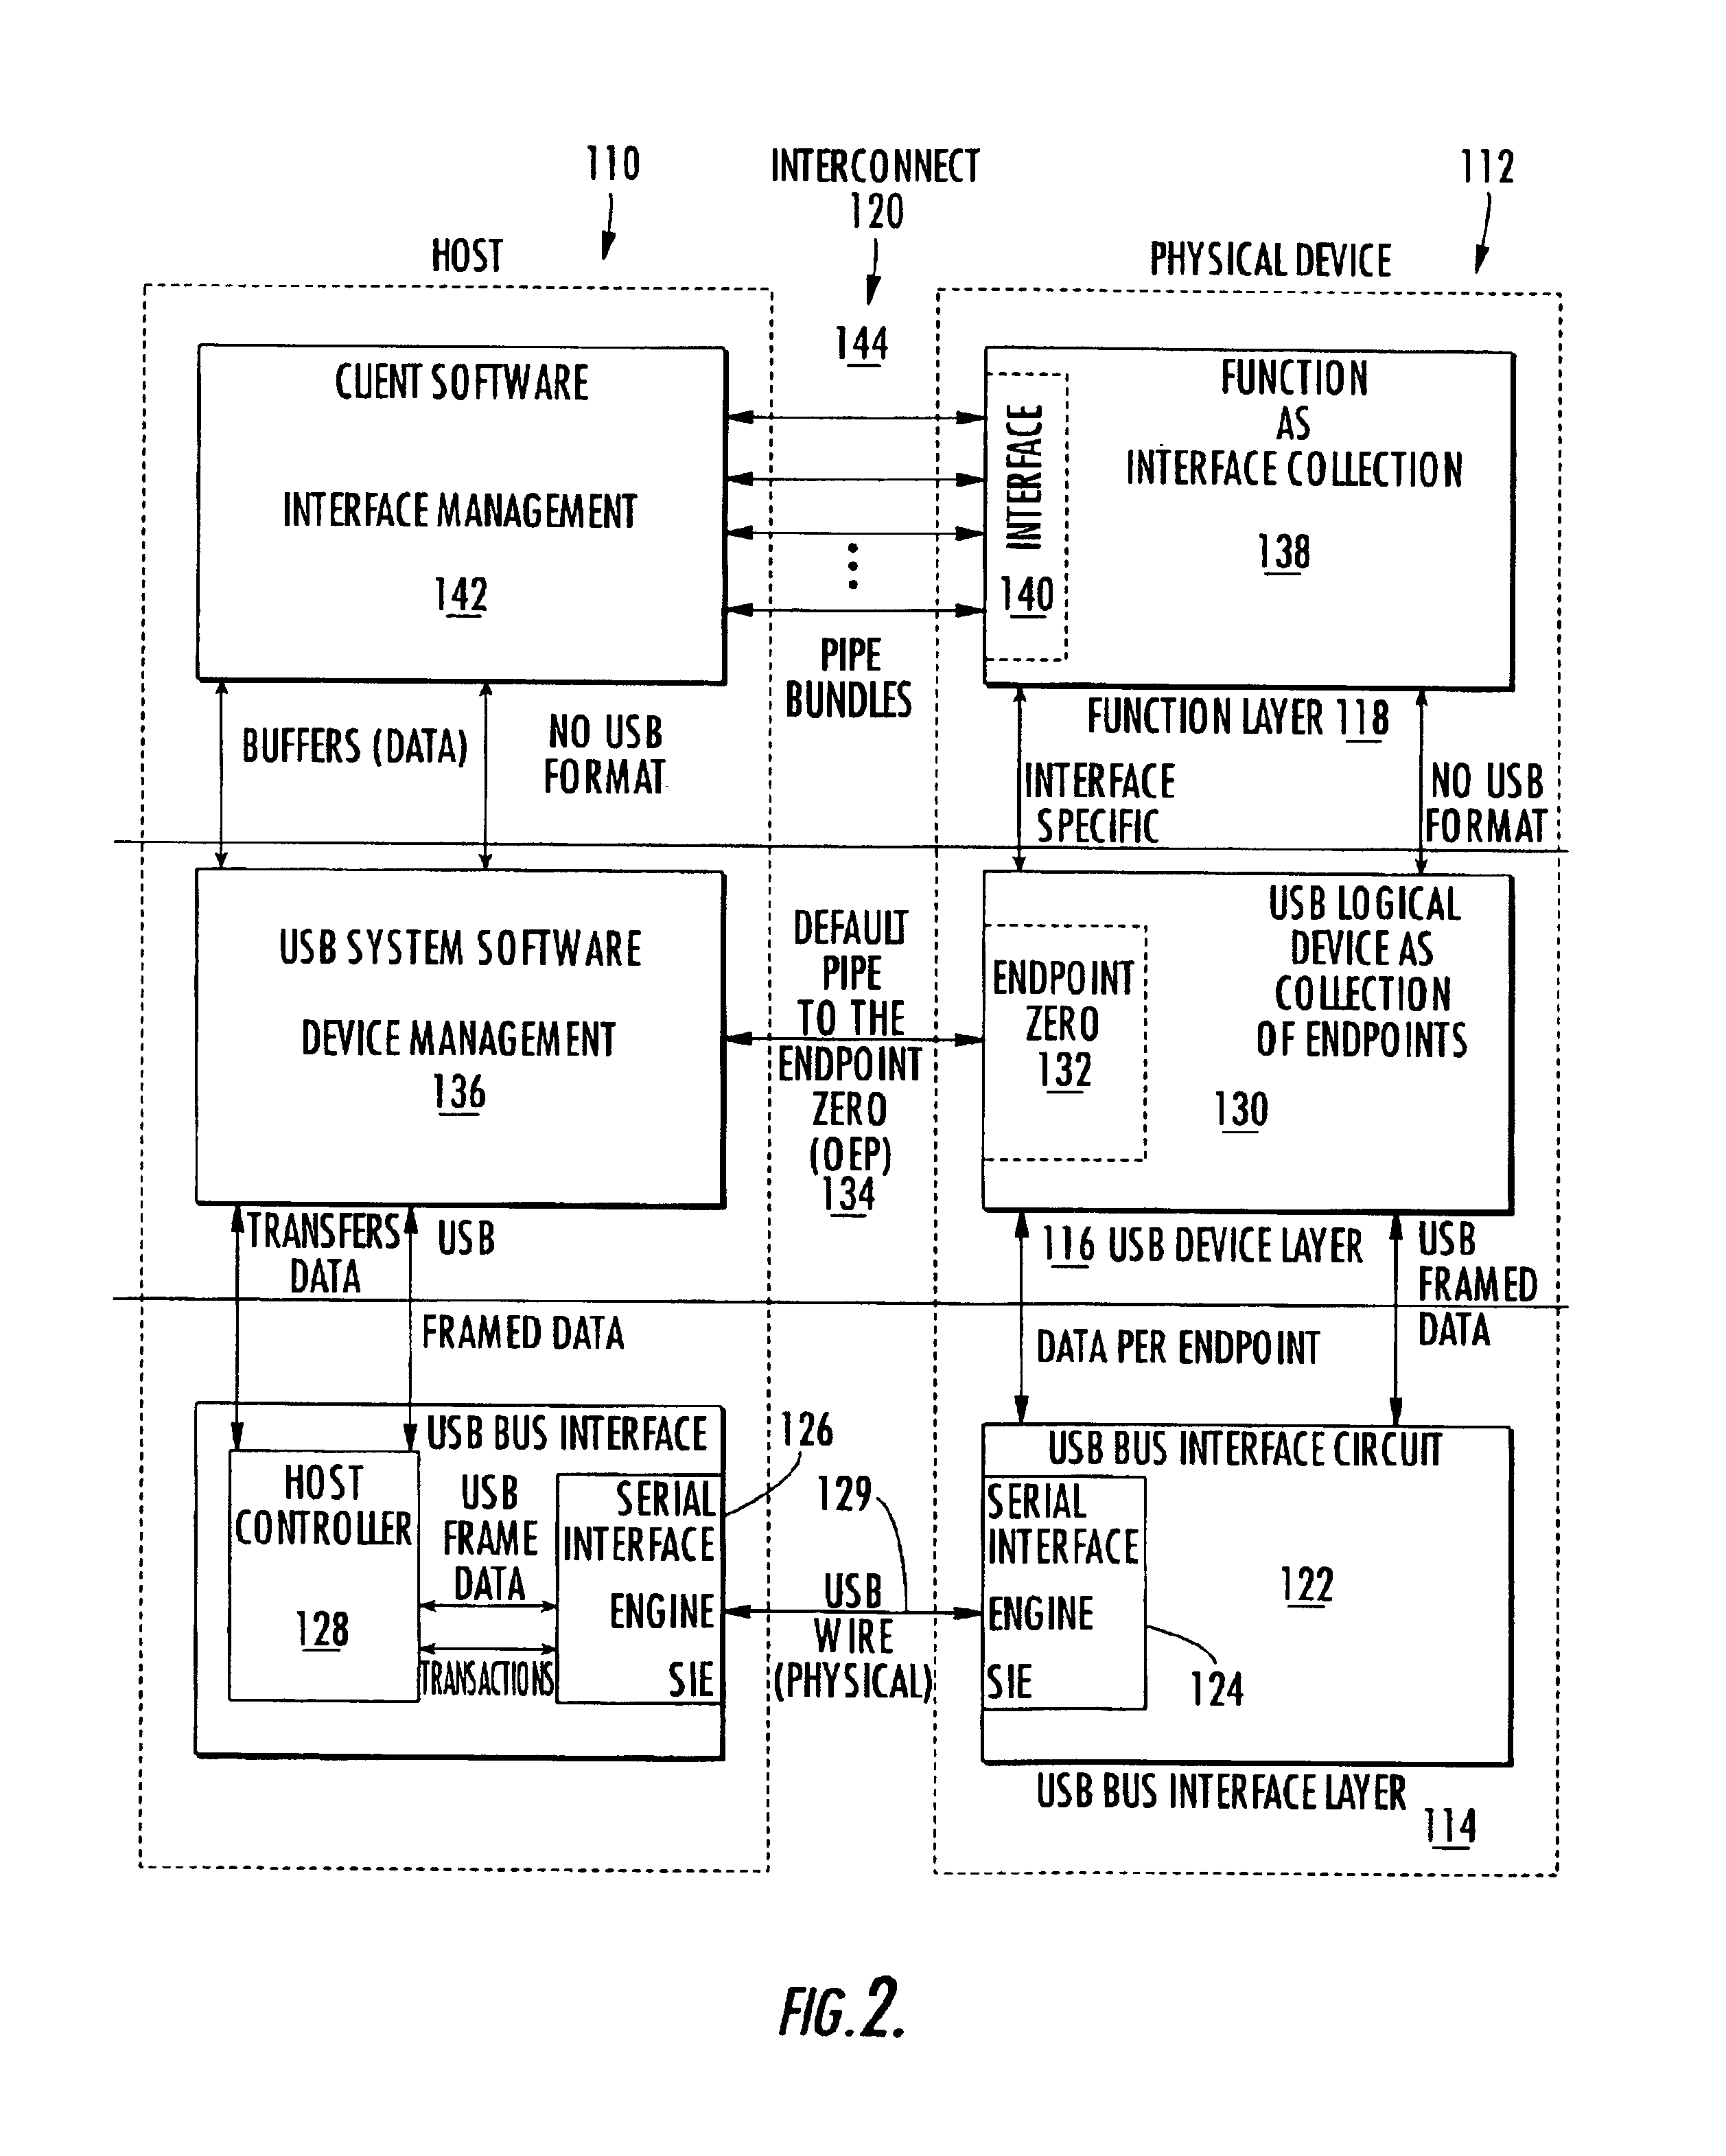 Smart card device used as mass storage device